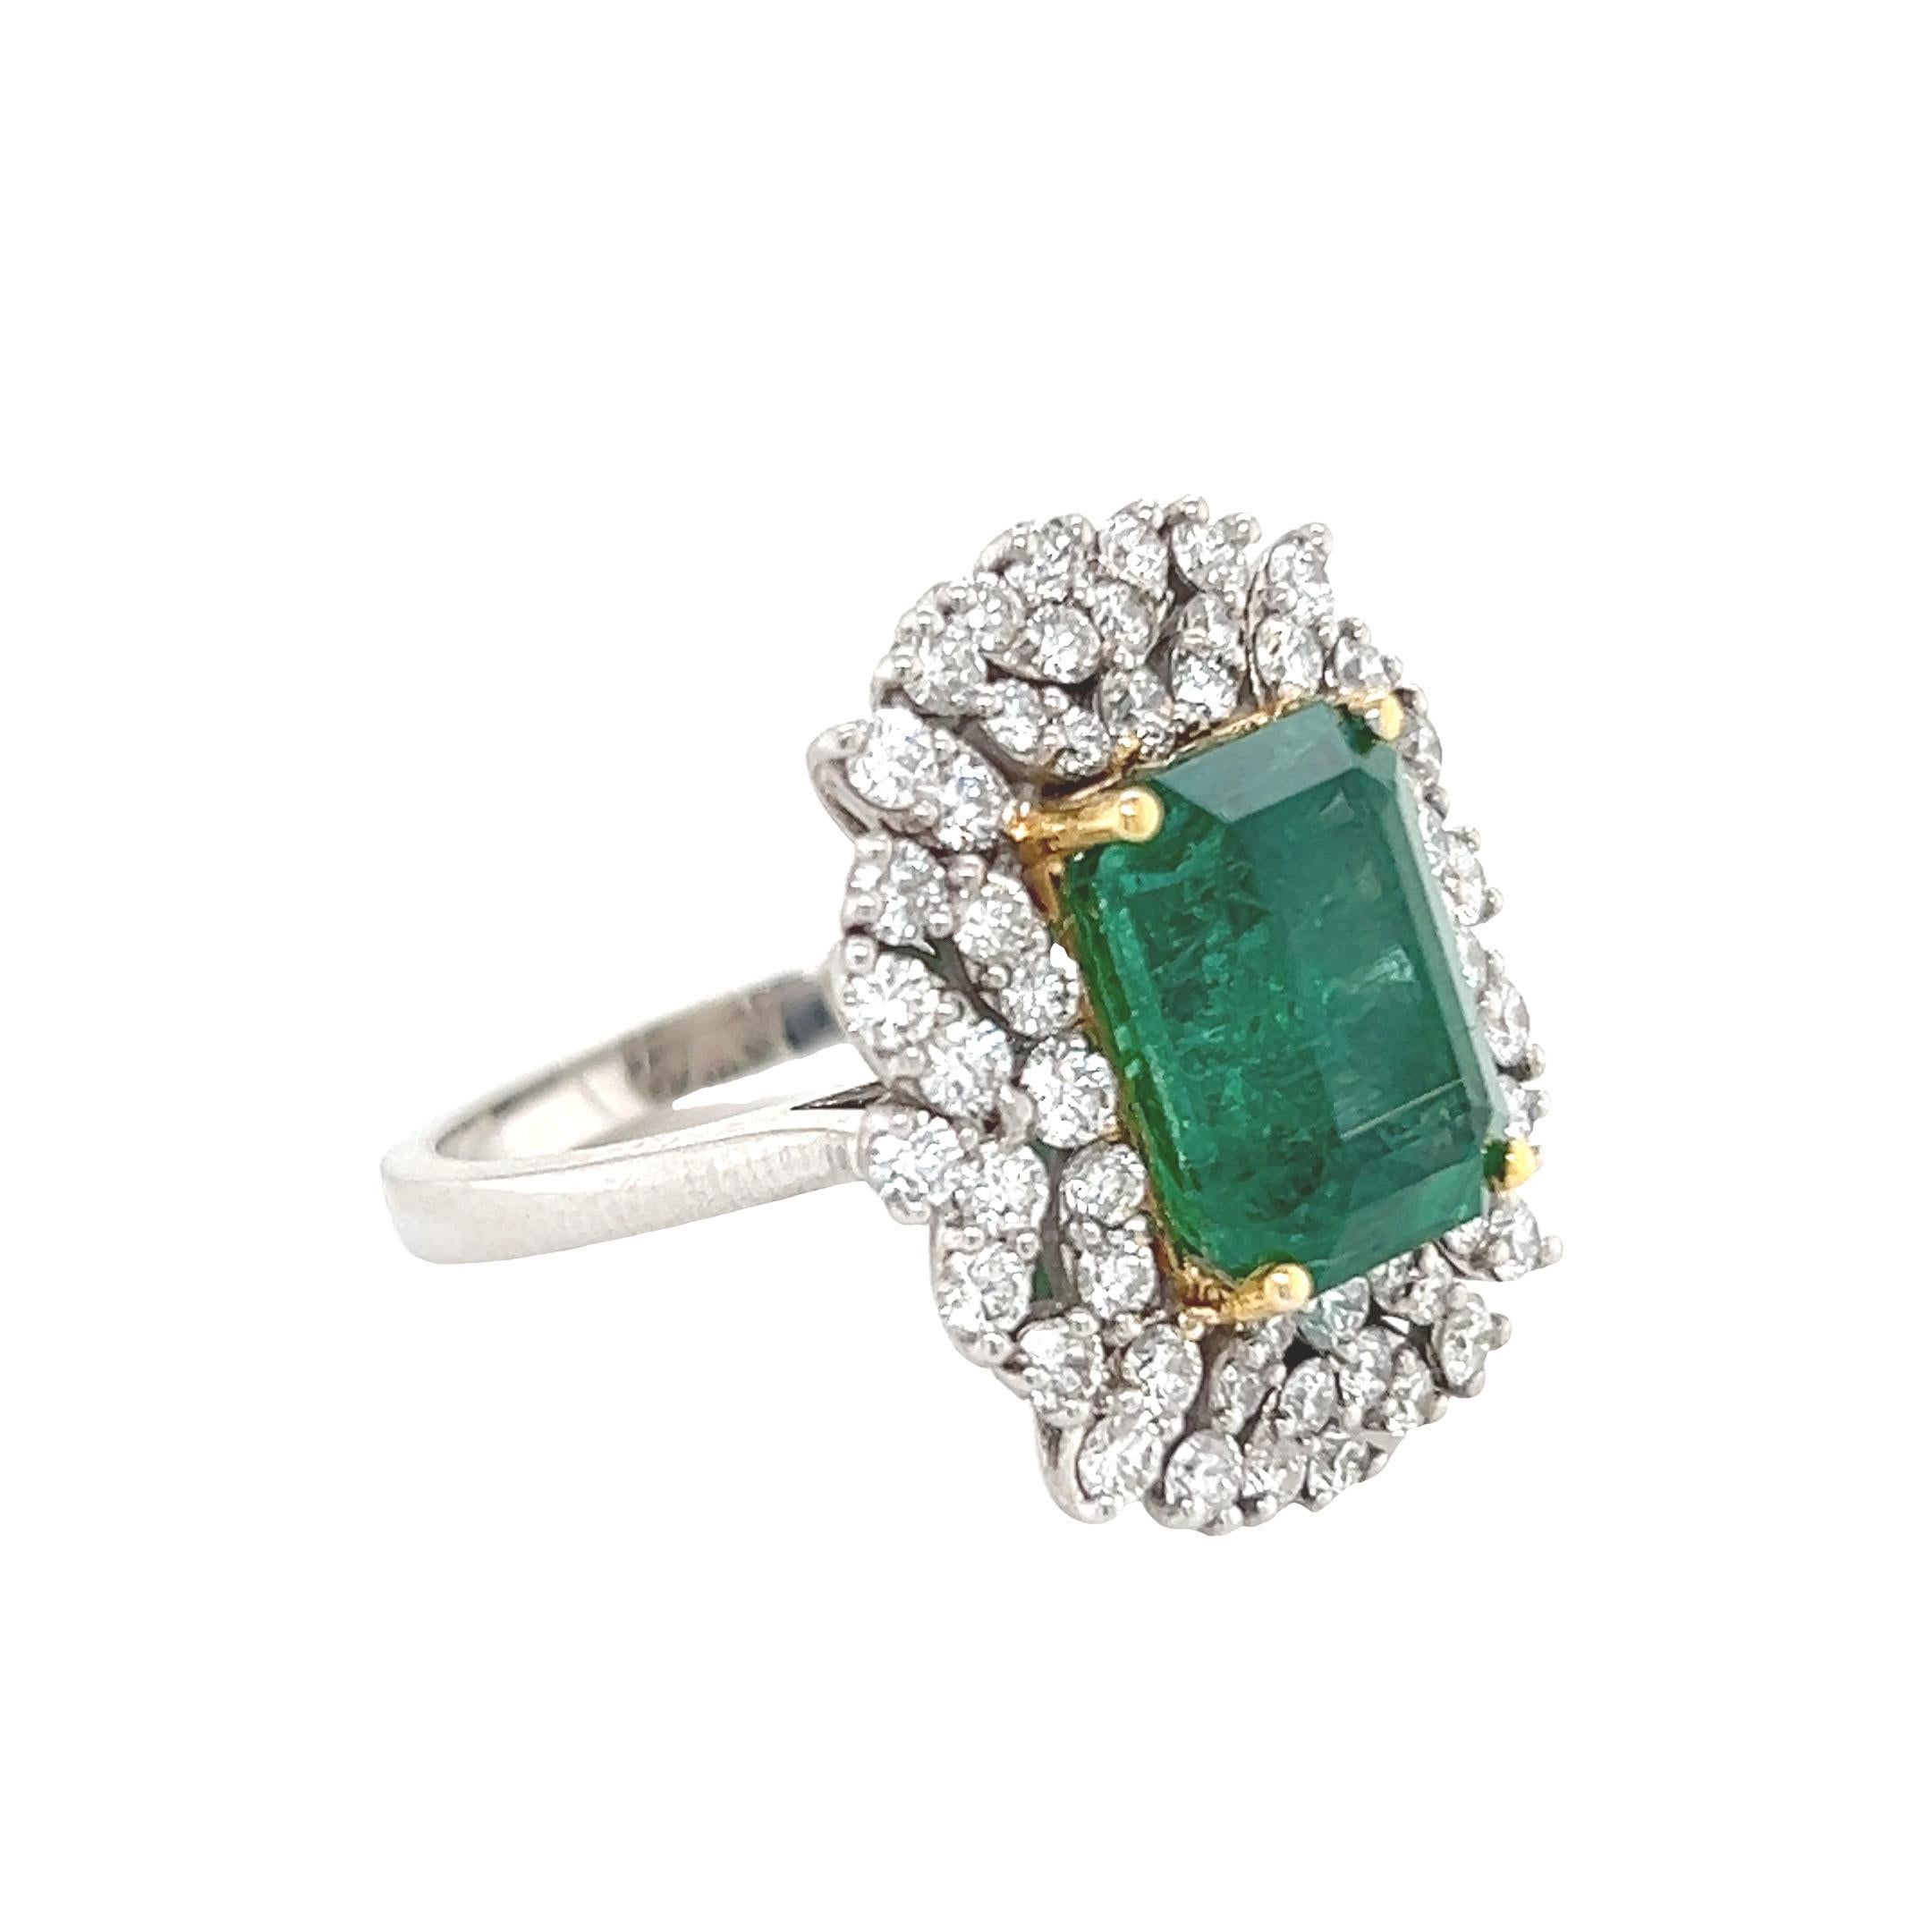 Charismatic emerald ring. High brilliance, rich grass green tone, emerald faceted, Zambian origin, natural 5.66 carats emerald encased in high profile with open basket with four yellow gold bead prongs, accented with round round brilliant cut